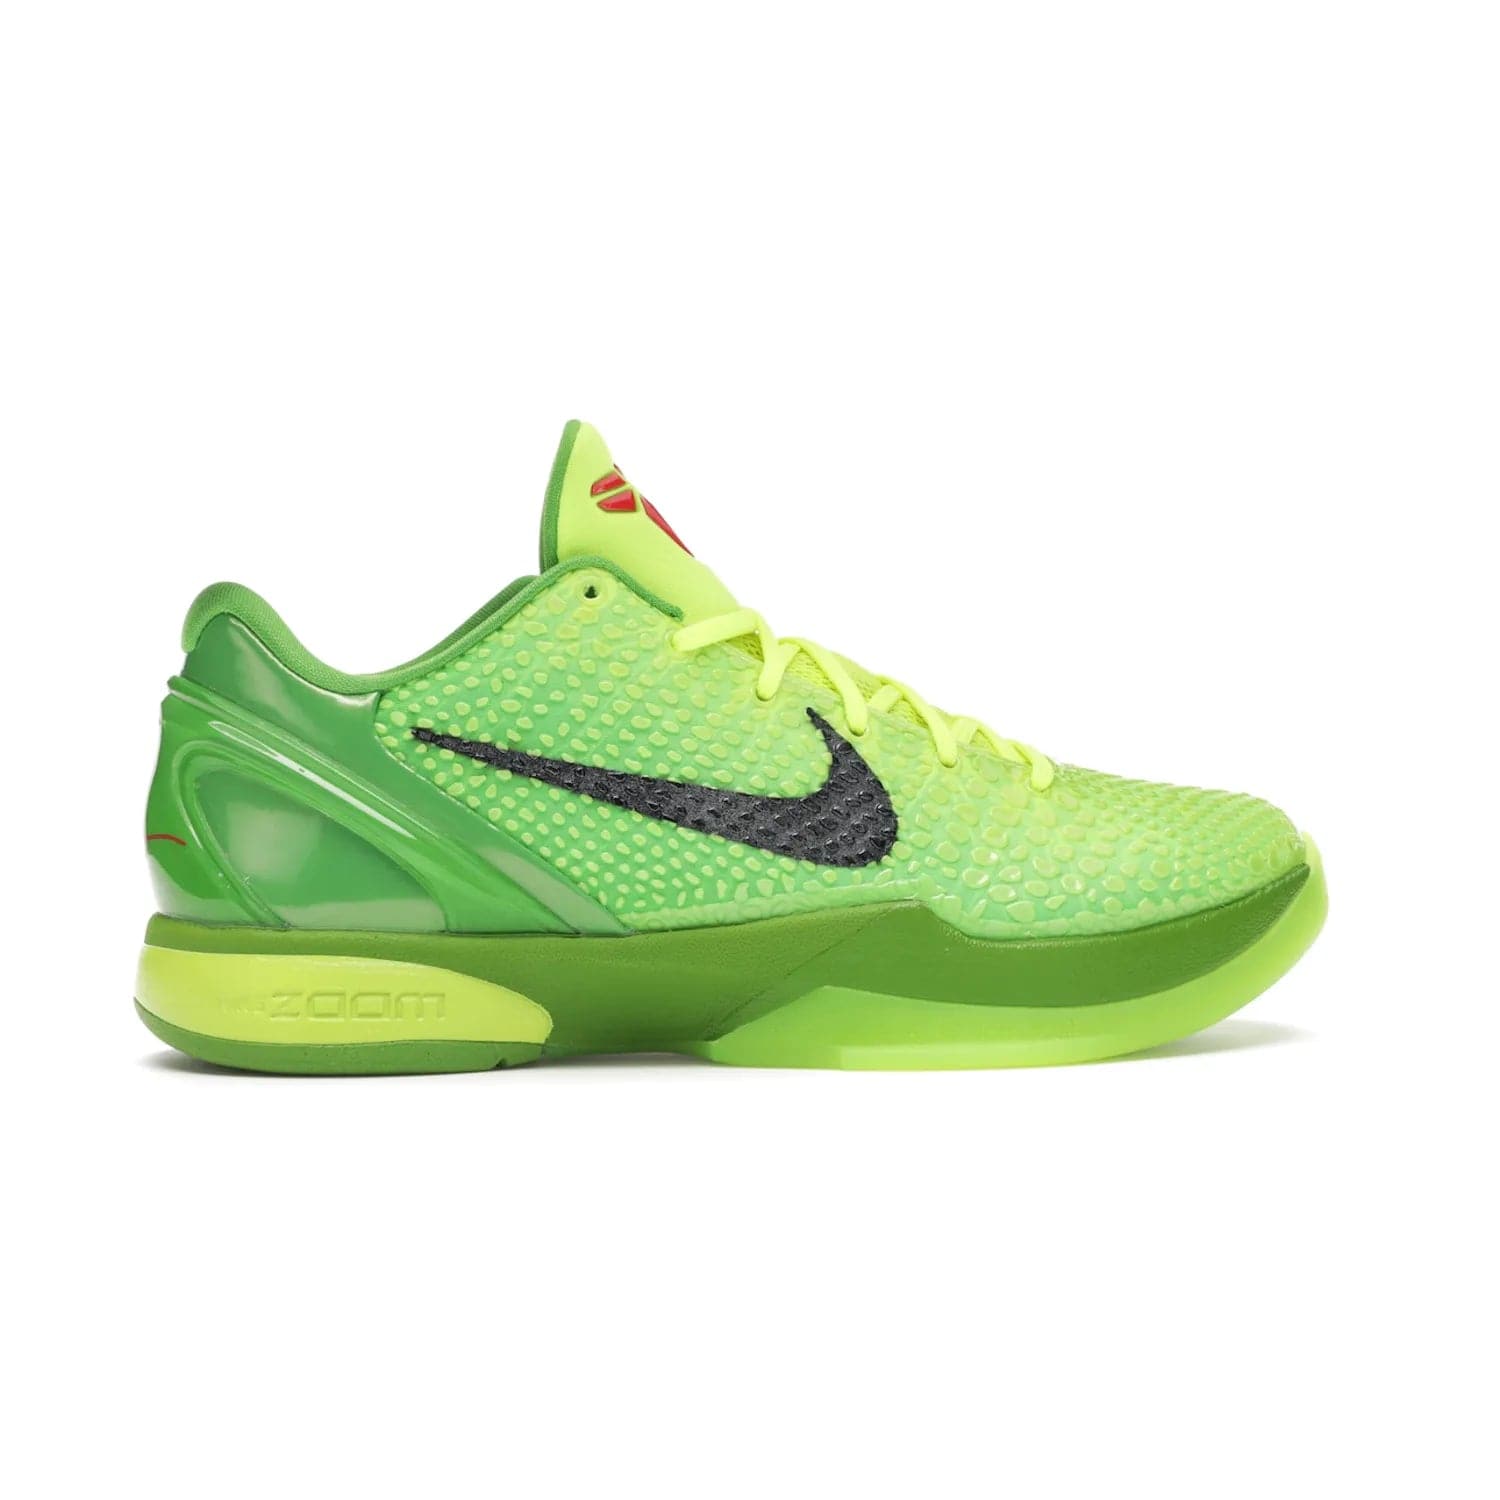 Nike Kobe 6 Protro Grinch (2020) - Image 36 - Only at www.BallersClubKickz.com - #
The Nike Kobe 6 Protro Grinch updates the iconic 2011 design with modern tech like a Zoom Air cushioning system, scaled-down traction, and updated silhouette. Experience the textured Green Apple and Volt upper plus bright red and green accents for $180.